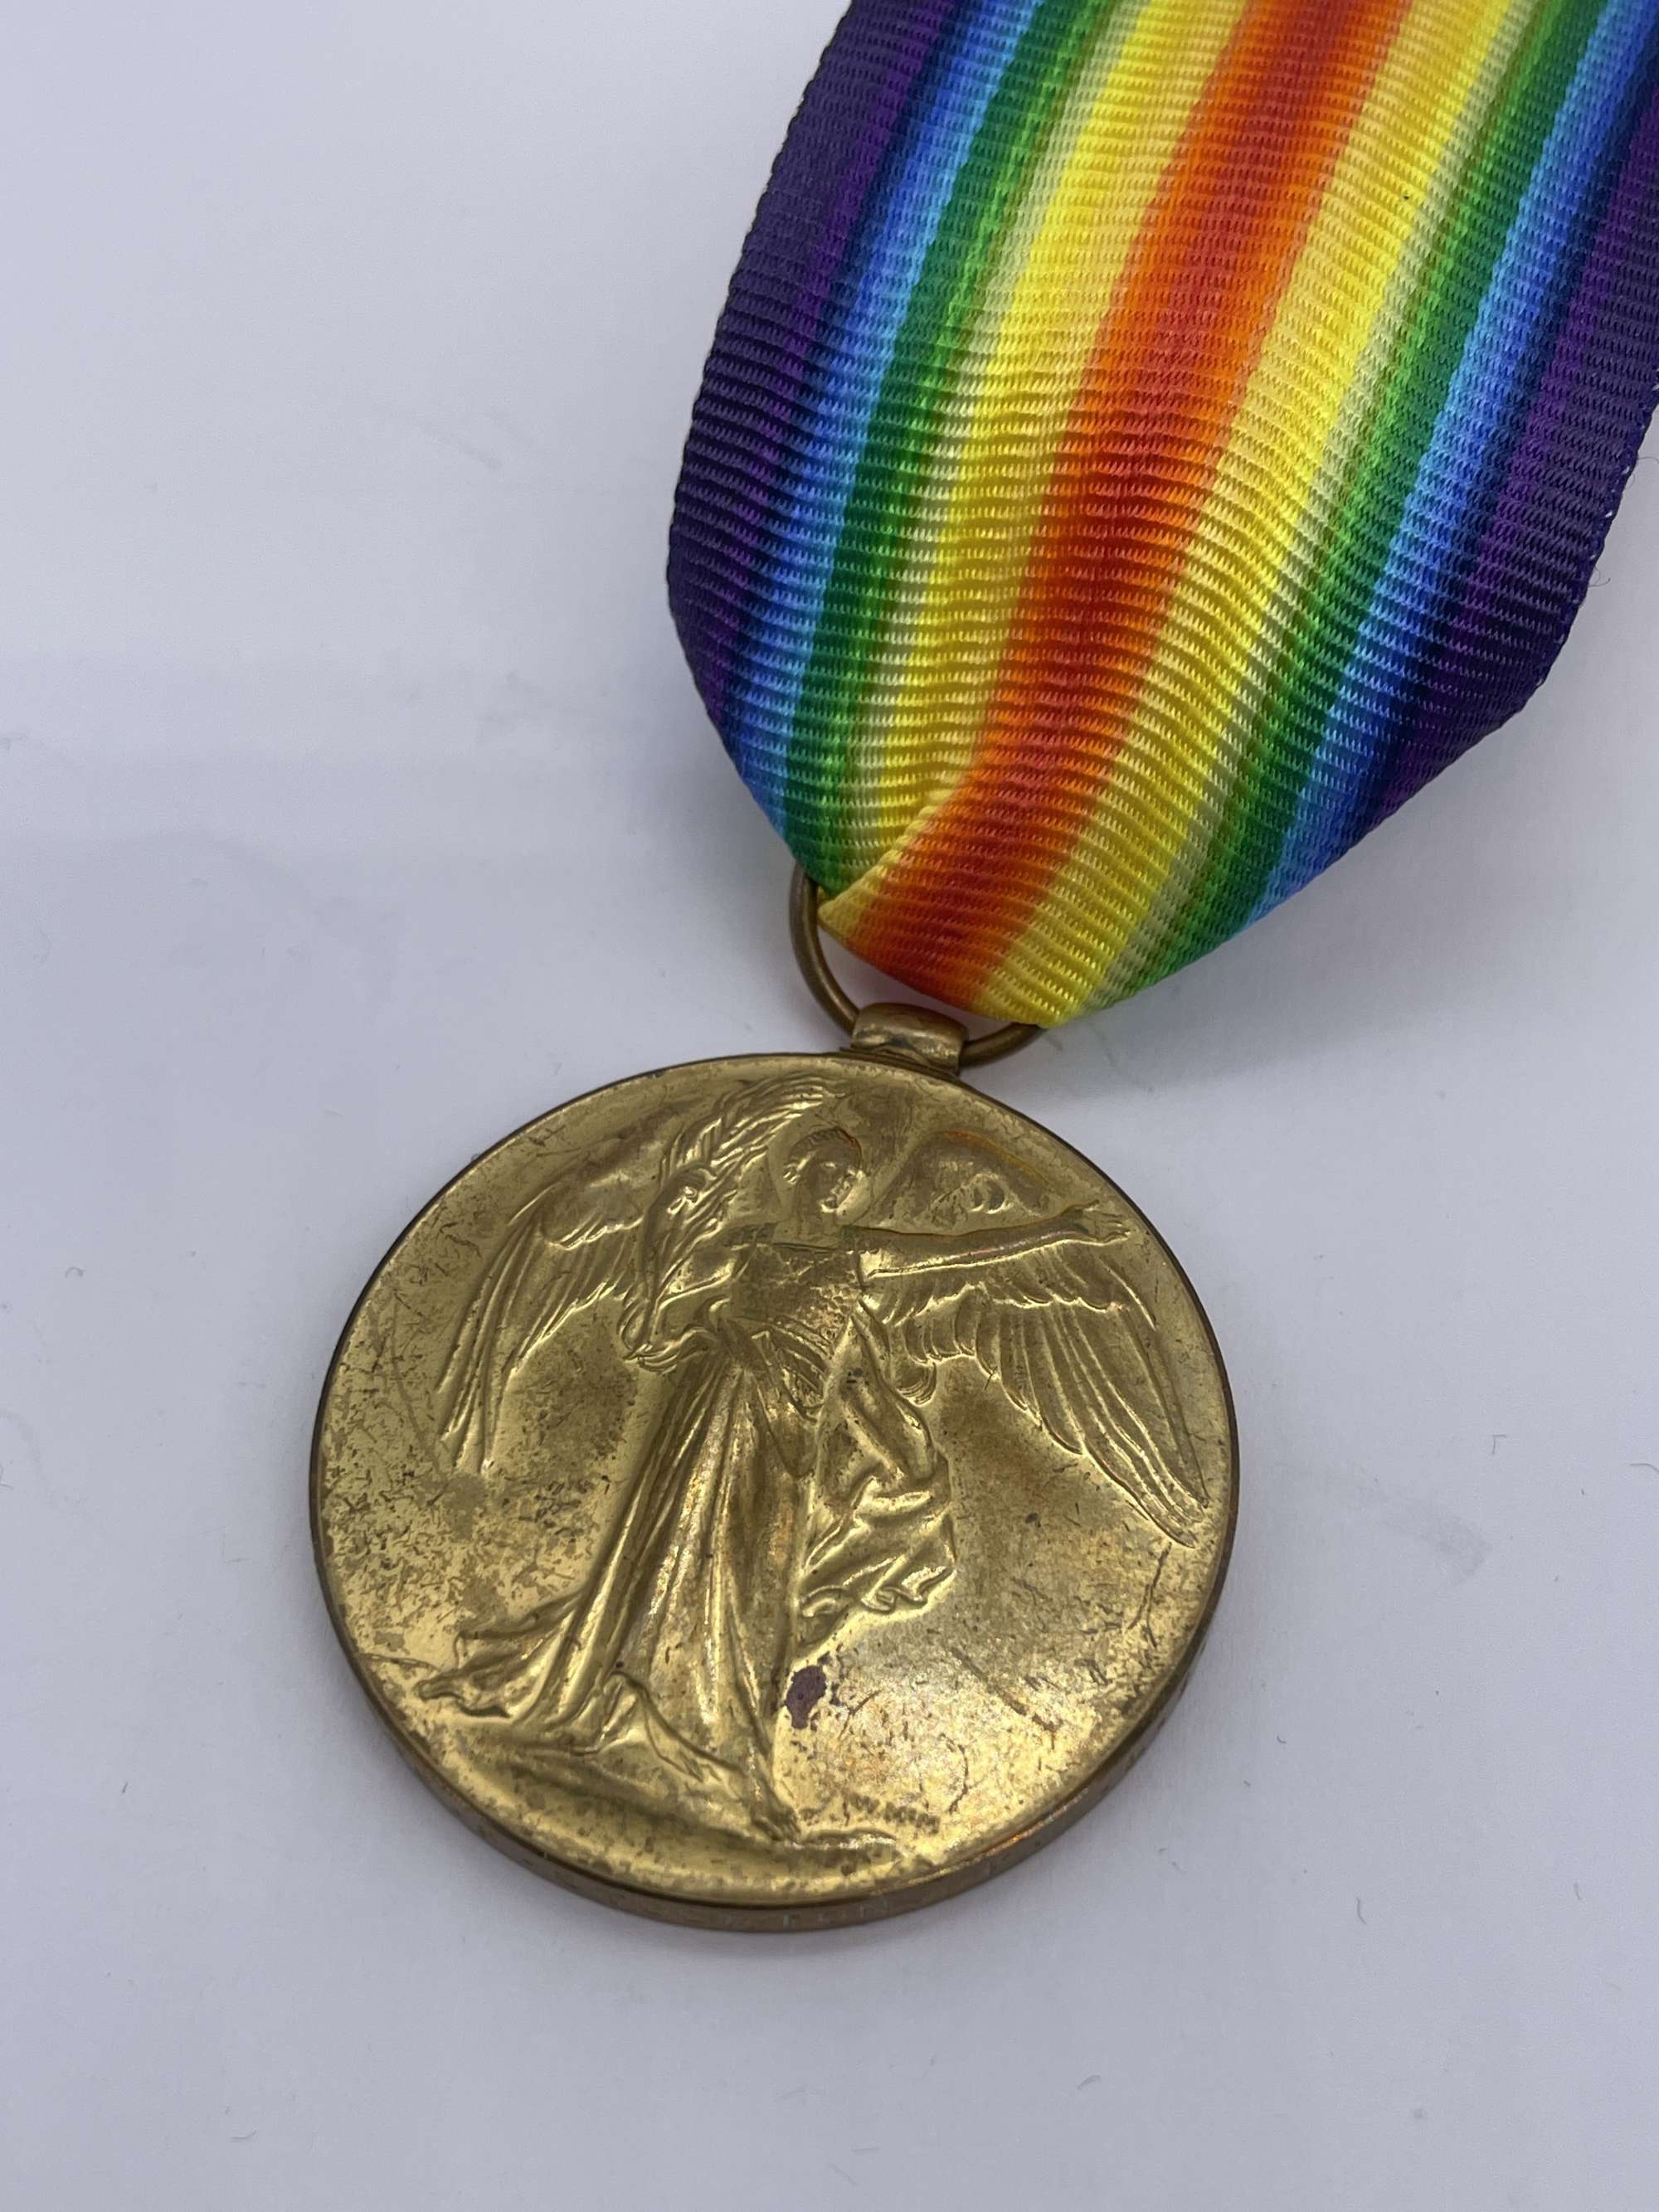 Original World War One Victory Medal, Pte Stockton, Kings Shropshire L. I., Killed in Acti